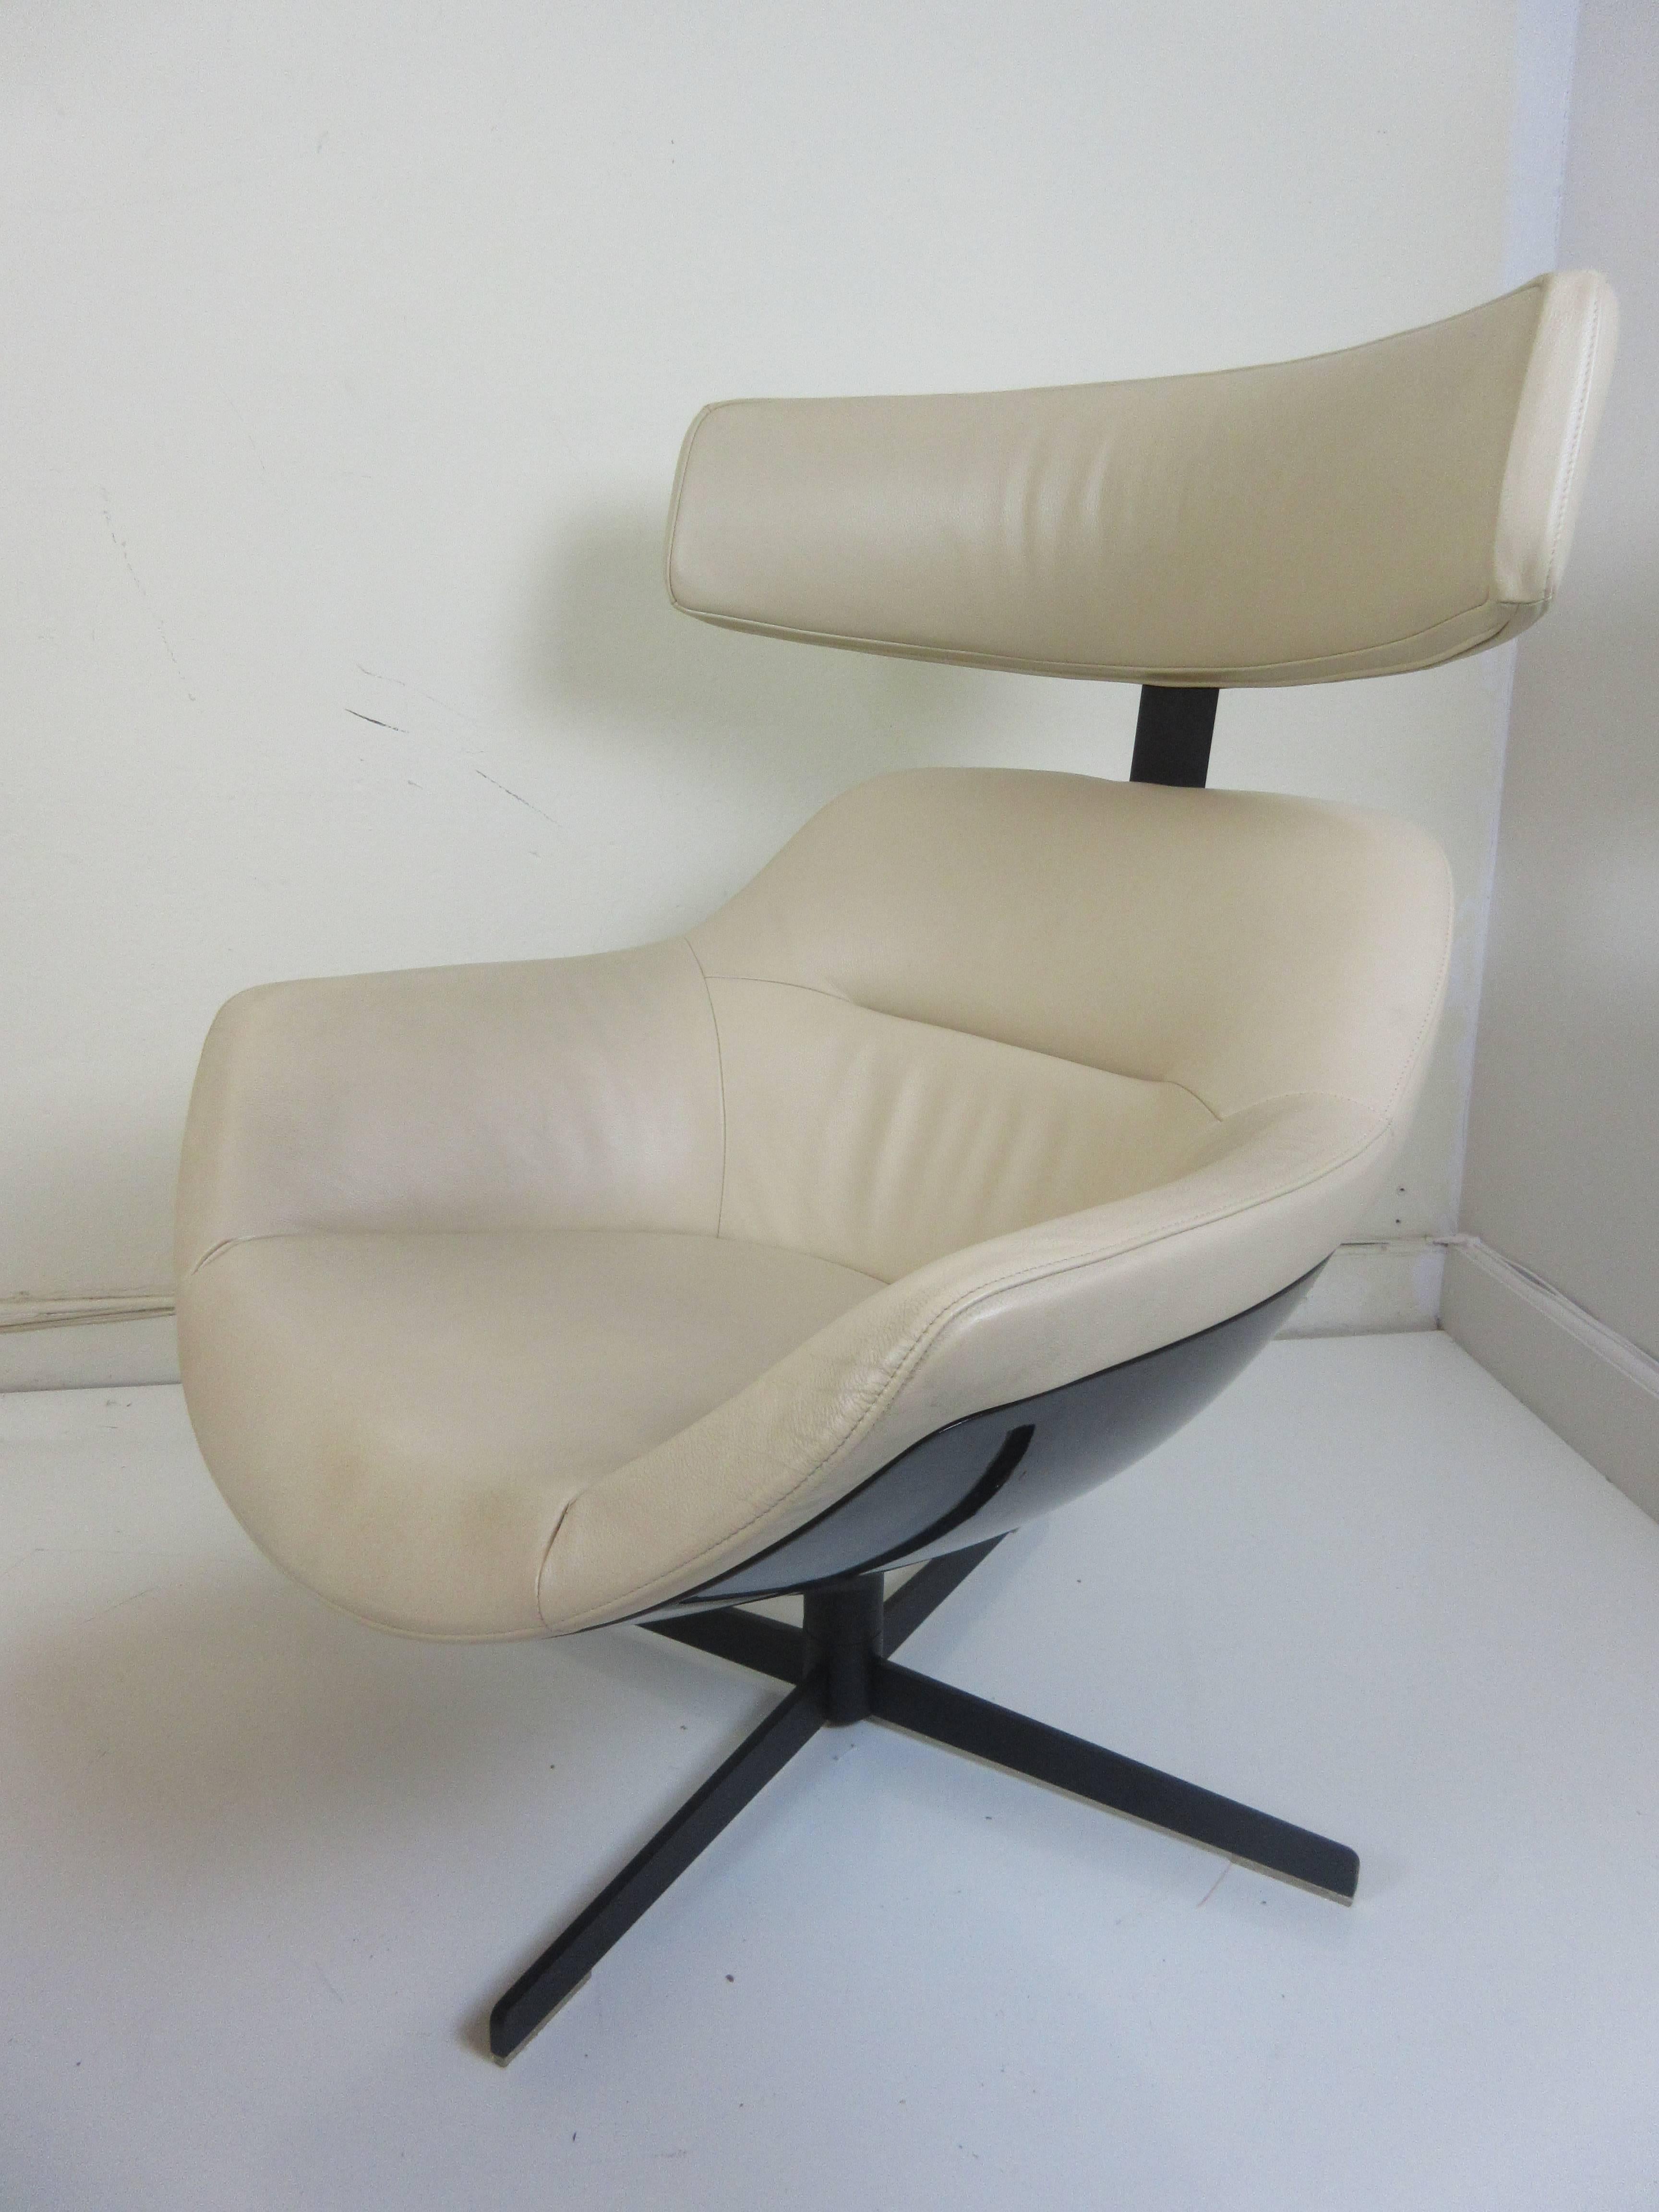 Jean-Mary Massaud Auckland chair and ottoman for Cassina from 2005. Both chair and ottoman swivel and are upholstered in an ivory leather. The head rest has eight separate upward adjustments to accommodate persons of varying heights. Bases of chair